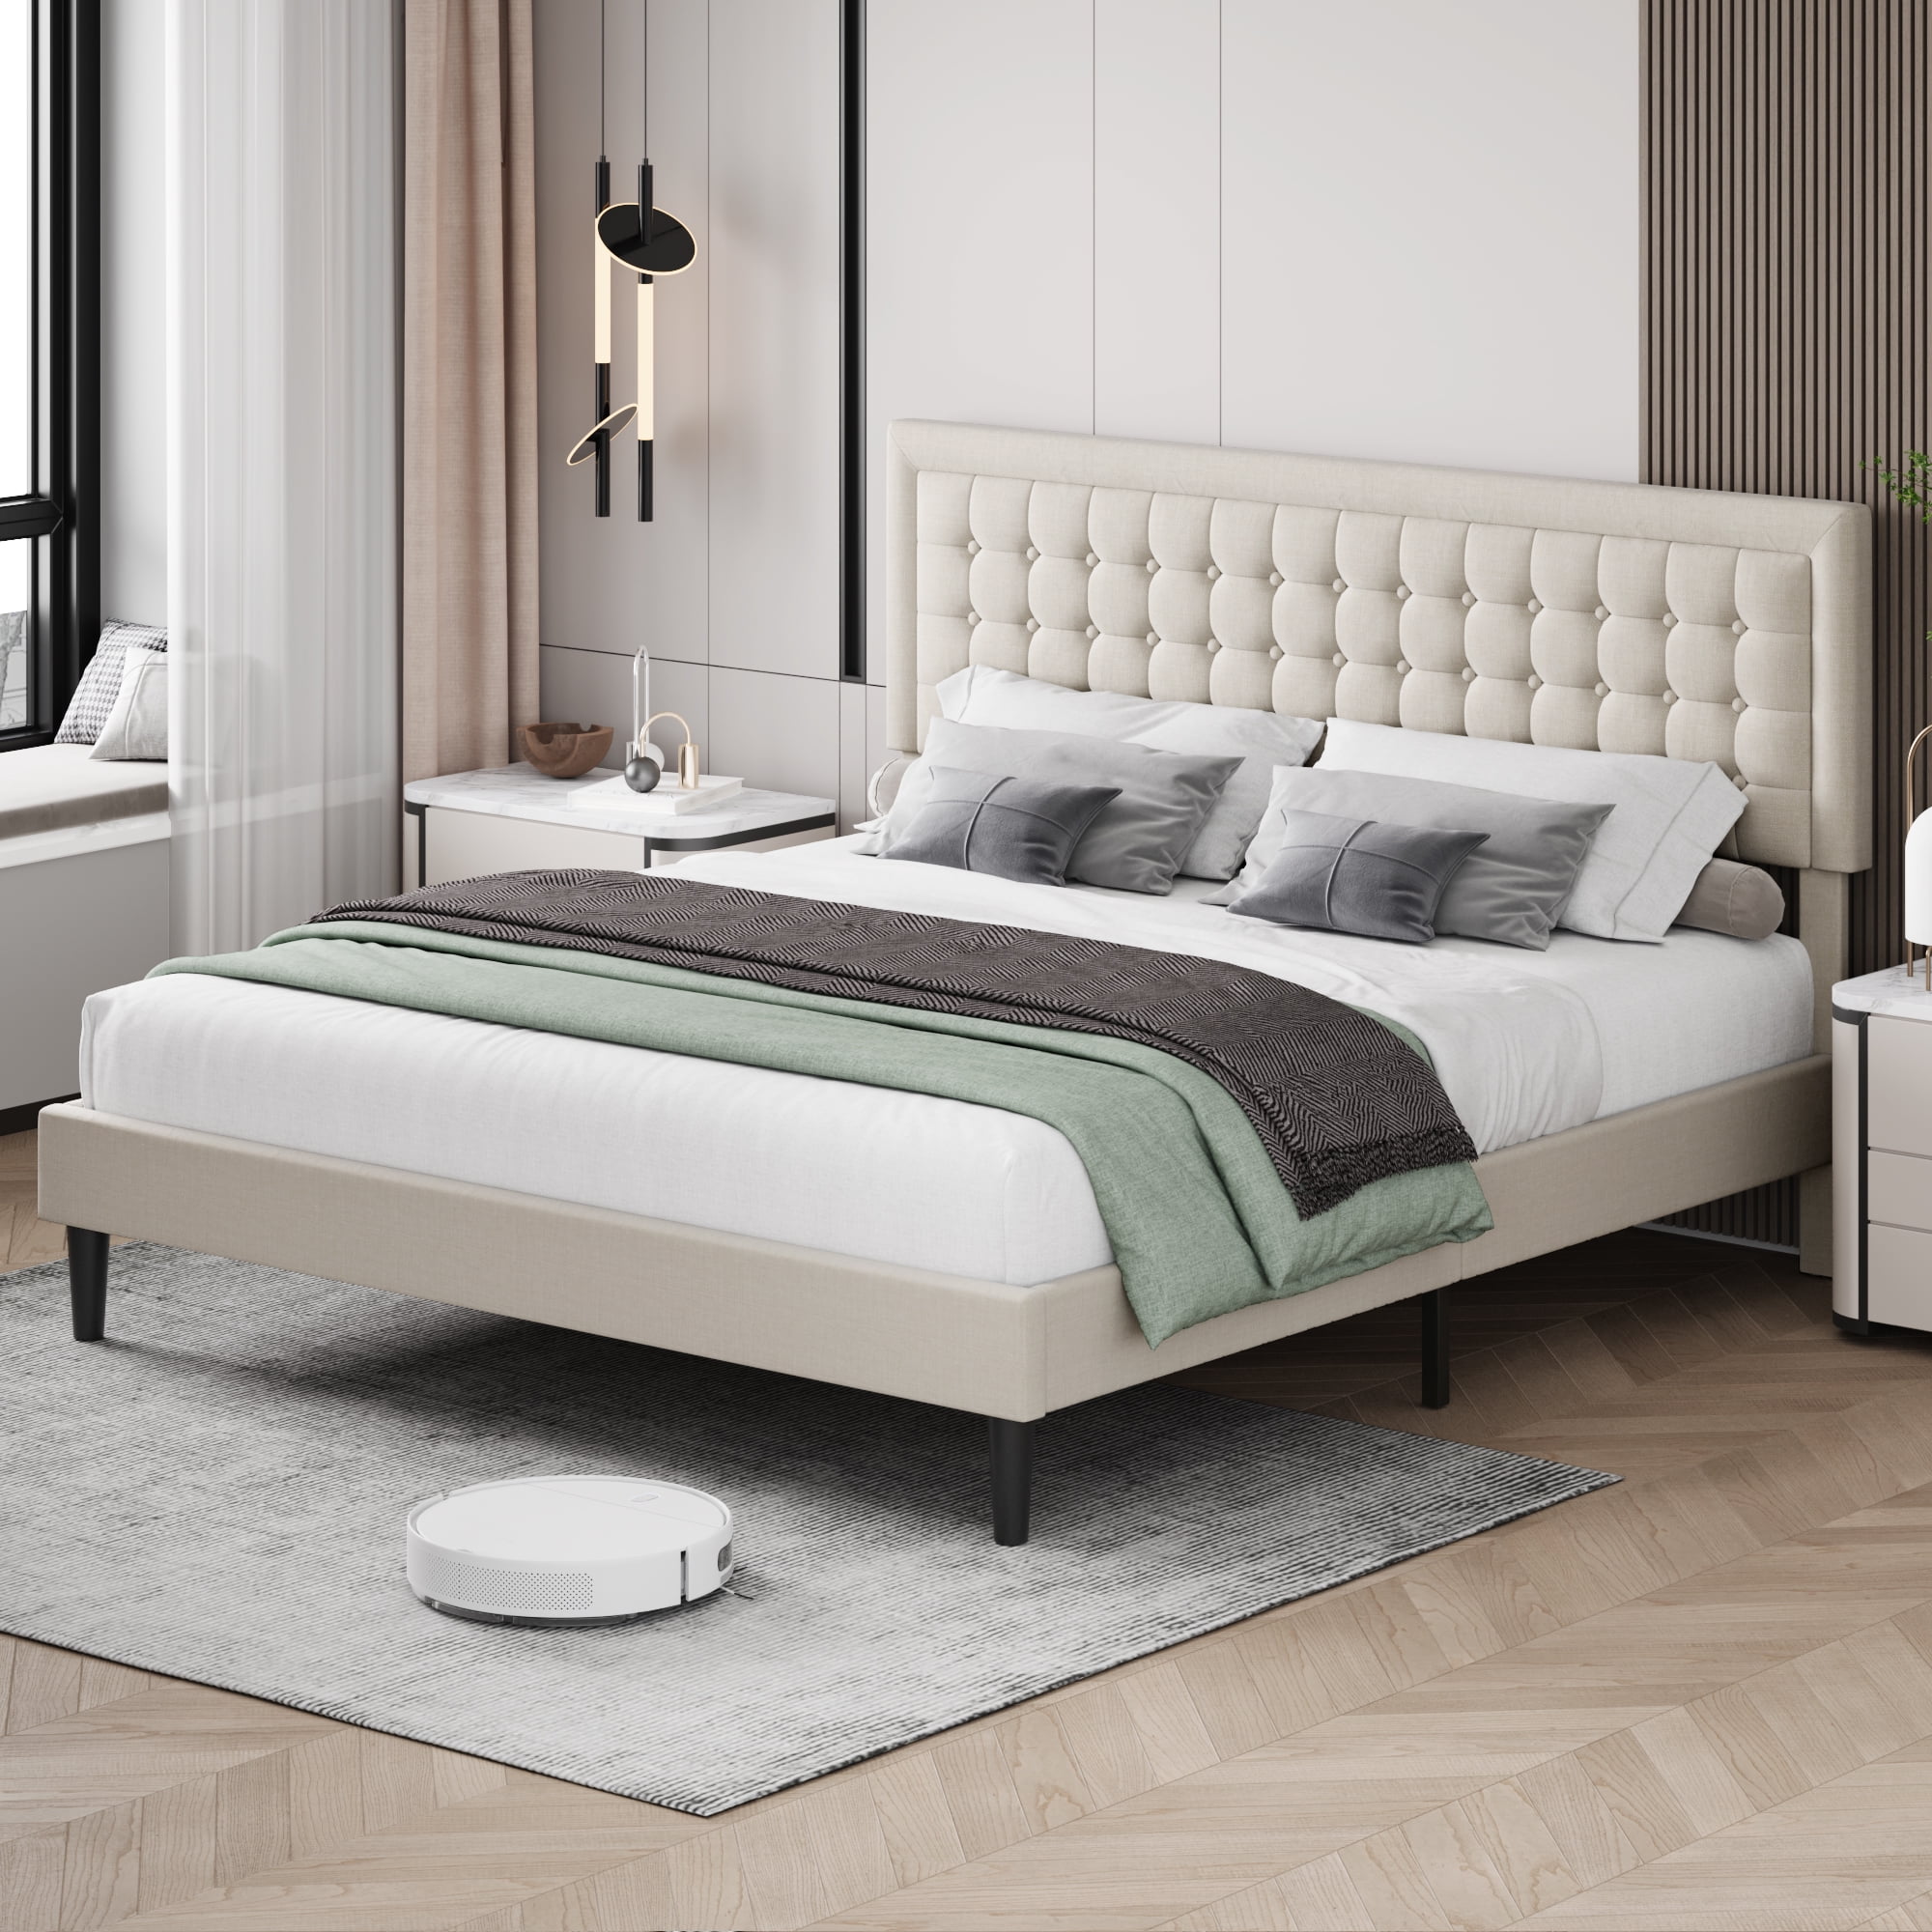 Homfa Queen Size Bed, Button PU Leather Upholstered Platform Bed